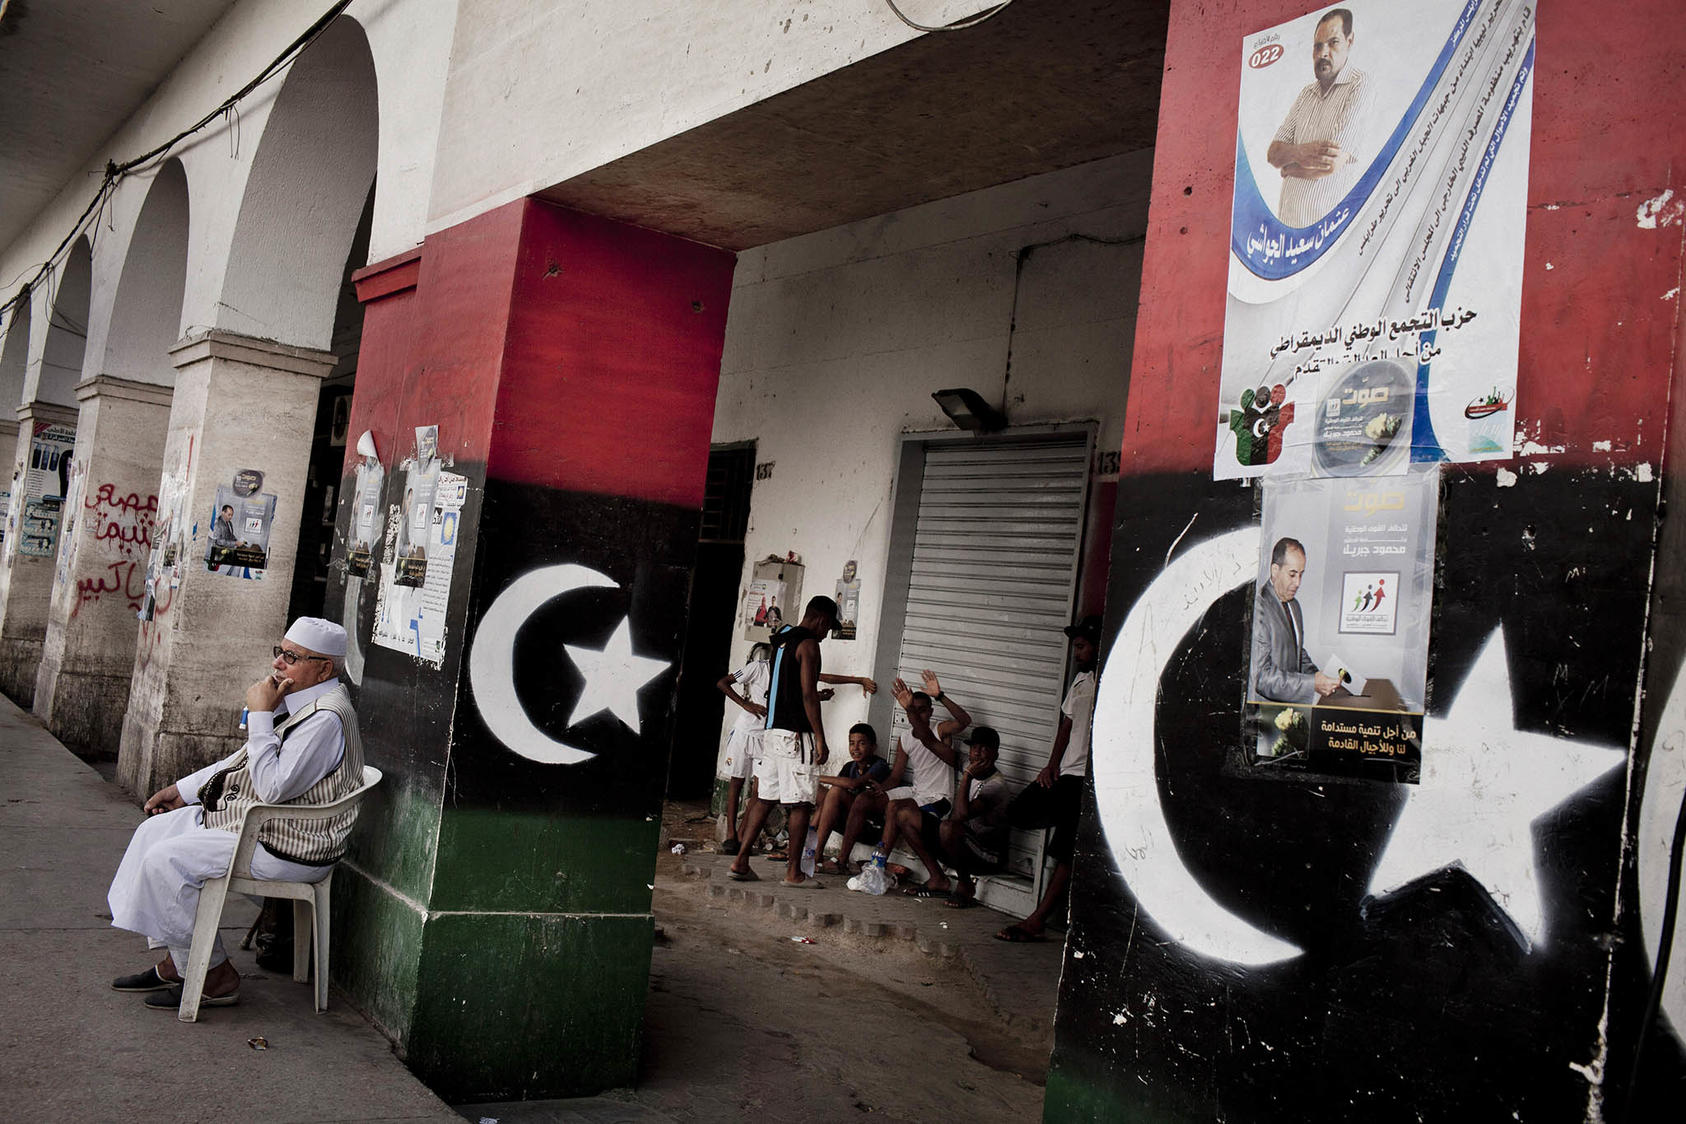 A man sits along a street littered ahead of Libya’s 2012 election in Tripoli, Libya. A new U.N. plan aims to have the country hold elections this year, but many Libyans want to focus on national reconciliation. (Tomas Munita/The New York Times)